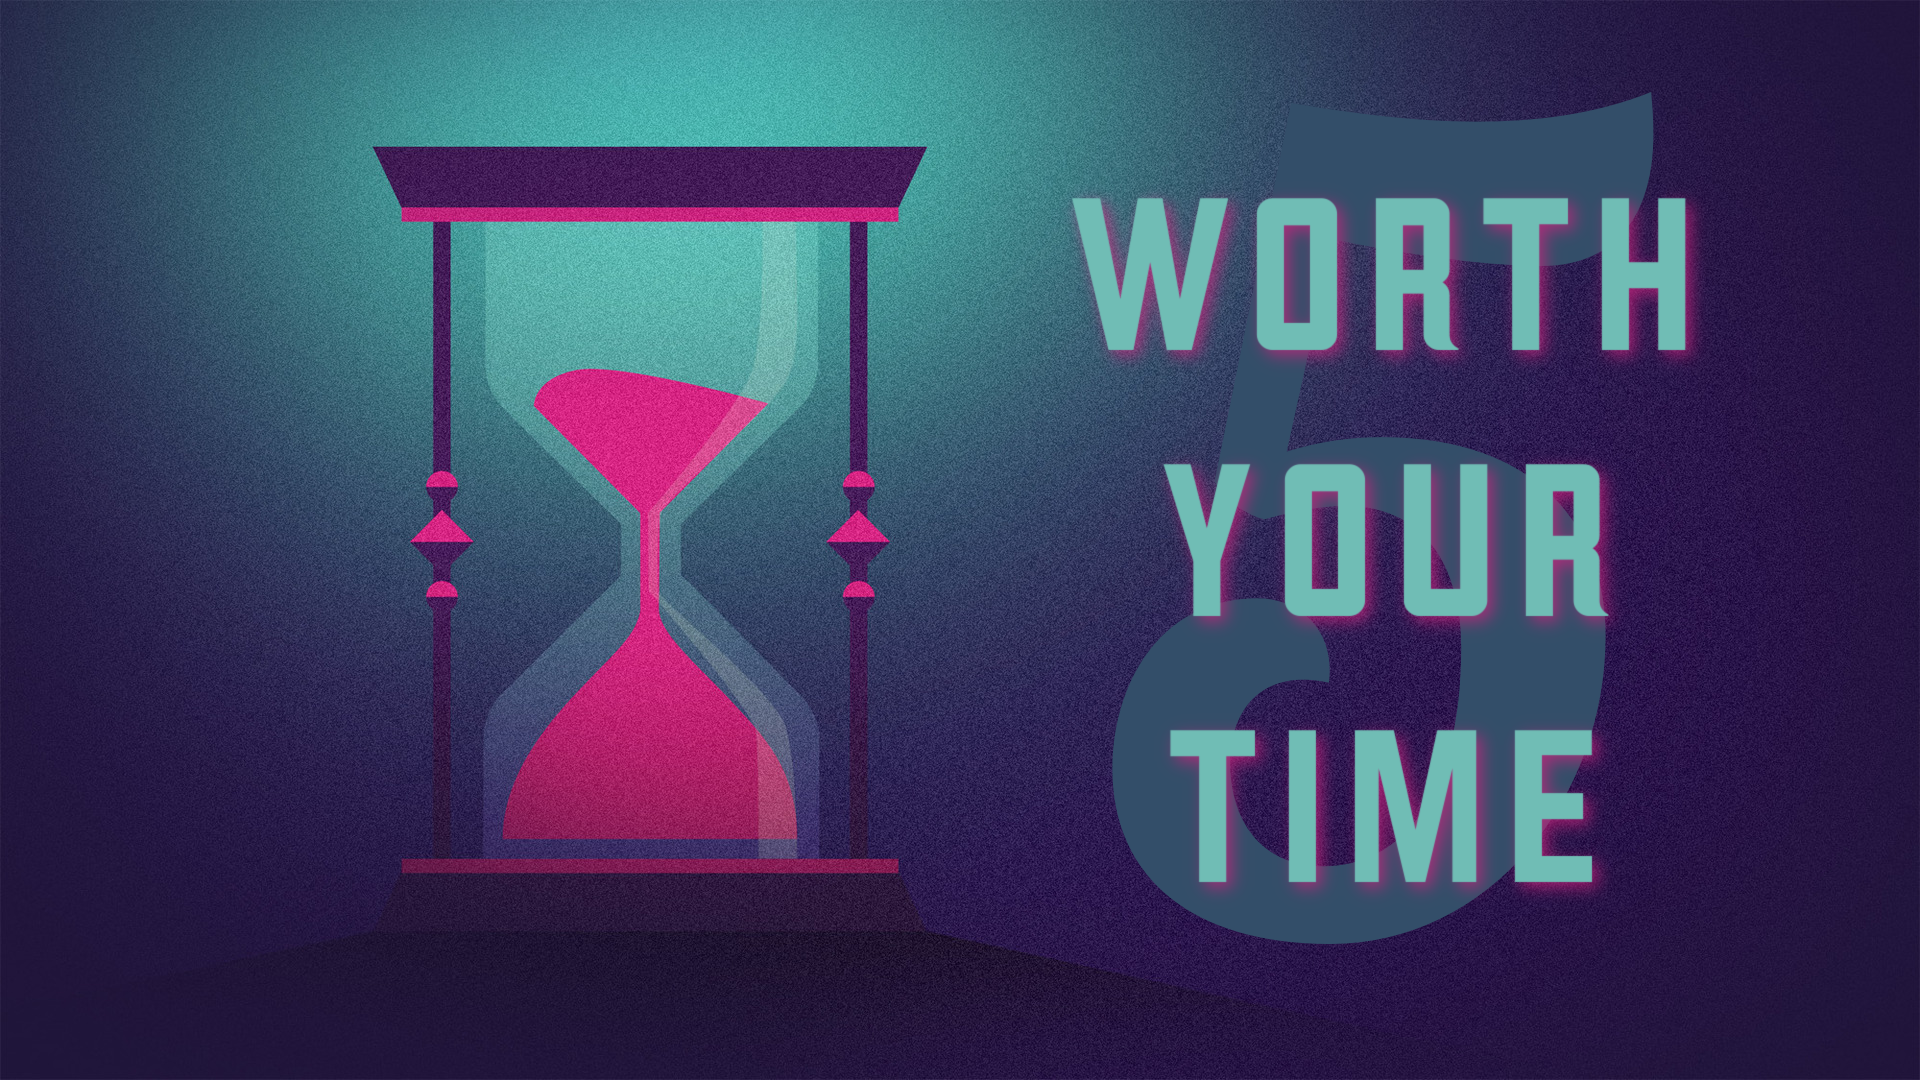 5 Things that are Worth Your Time